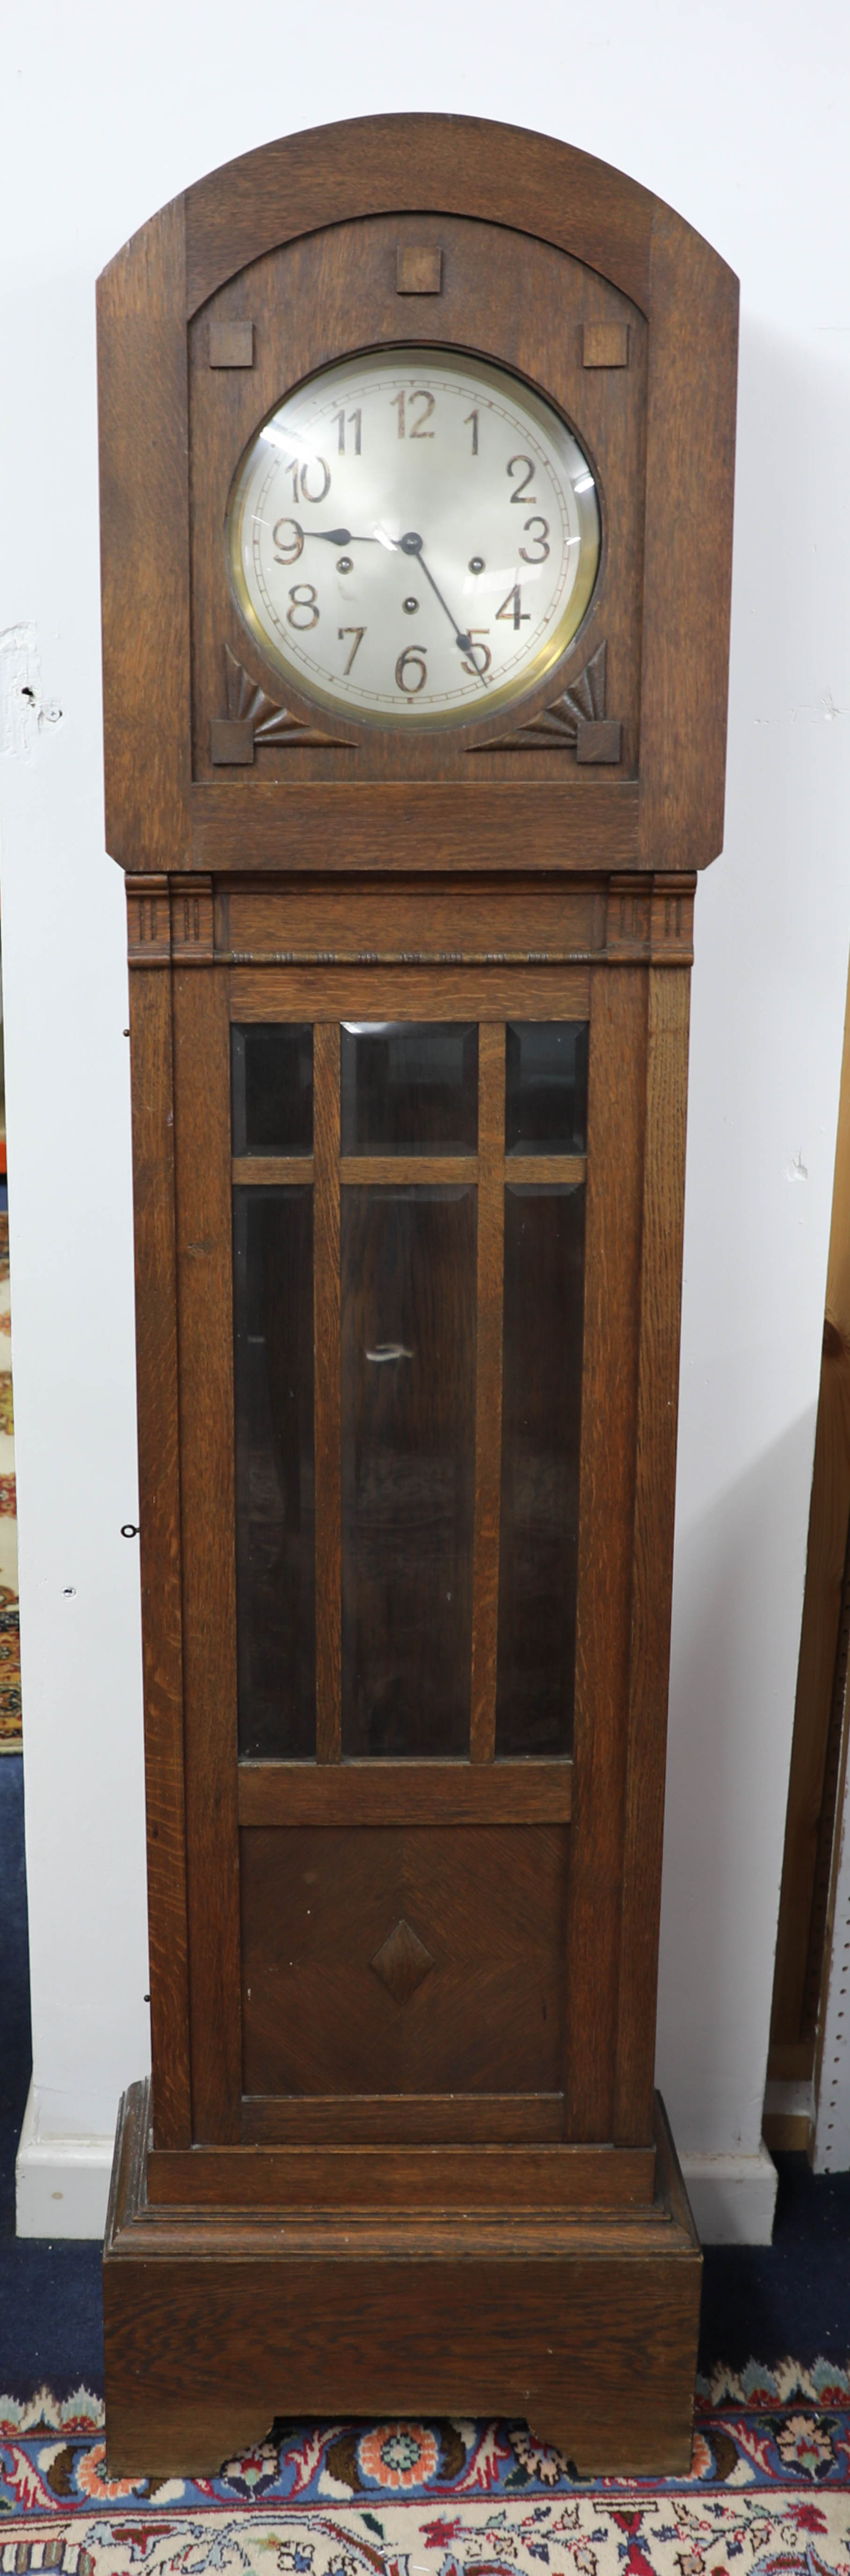 A 1930's oak longcase clock, with chiming movement.